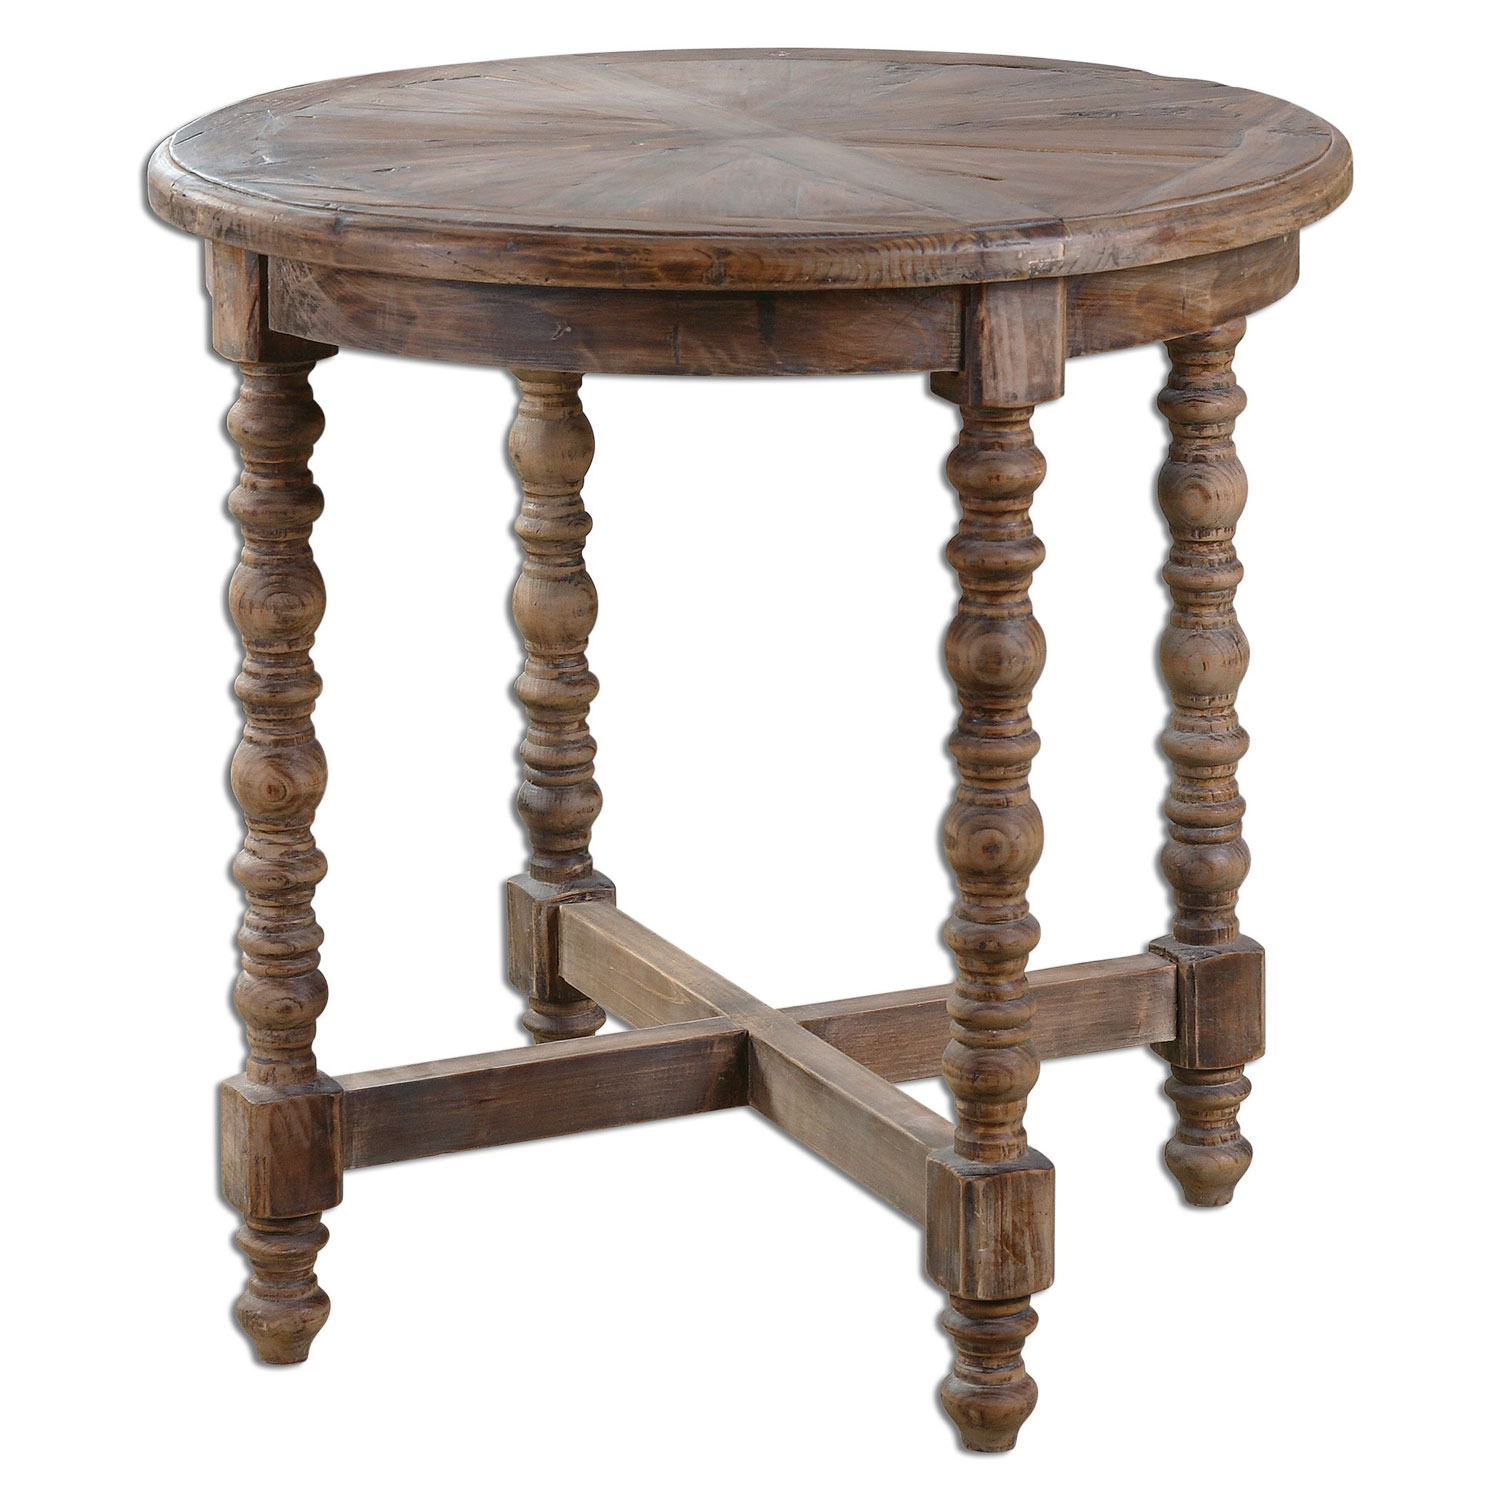 uttermost samuelle reclaimed fir wood end table bellacor tables accent hover zoom knotty pine bookcase patio umbrella stand mirrored side drawers dining room pieces sheet small